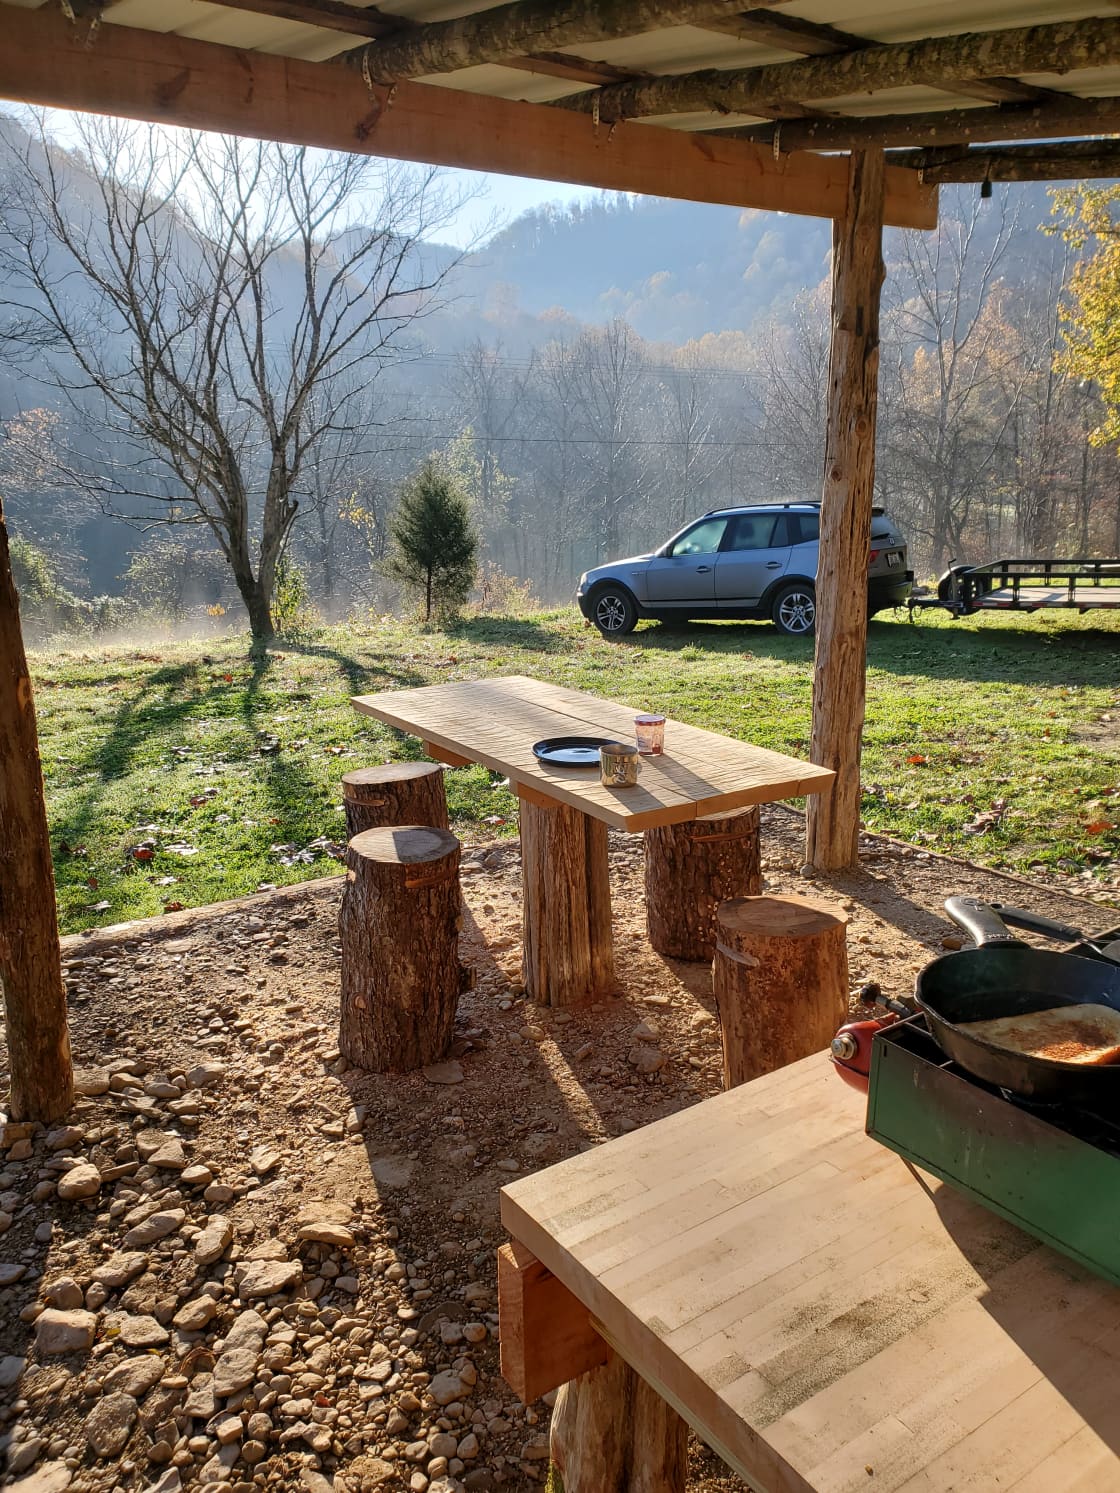 Morning view from the outdoor kitchen.